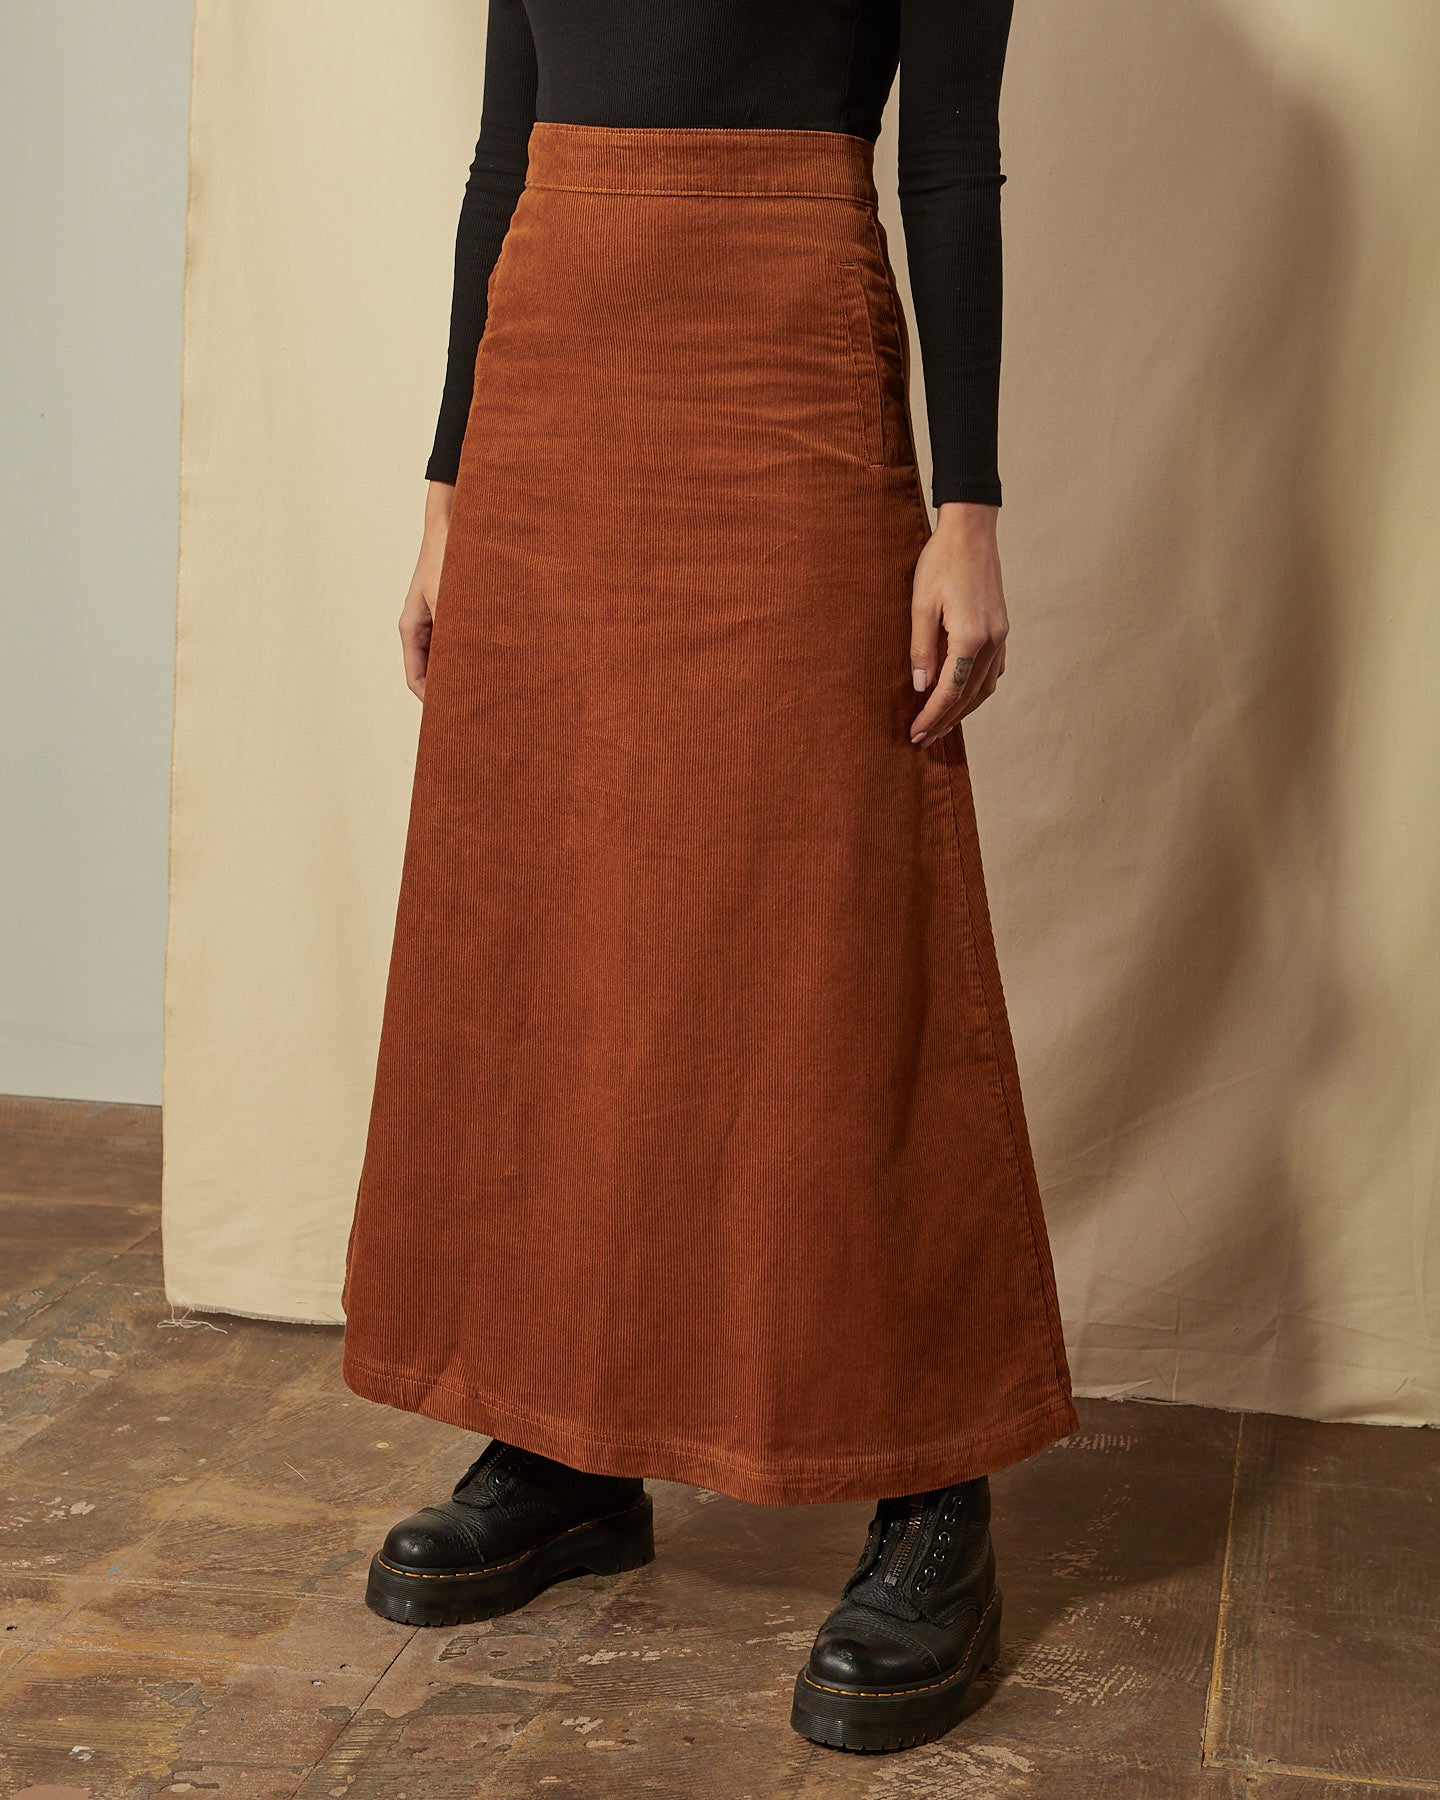 Close-up of Lottie brown corduroy full length skirt with clear view of cord fabric ridges.